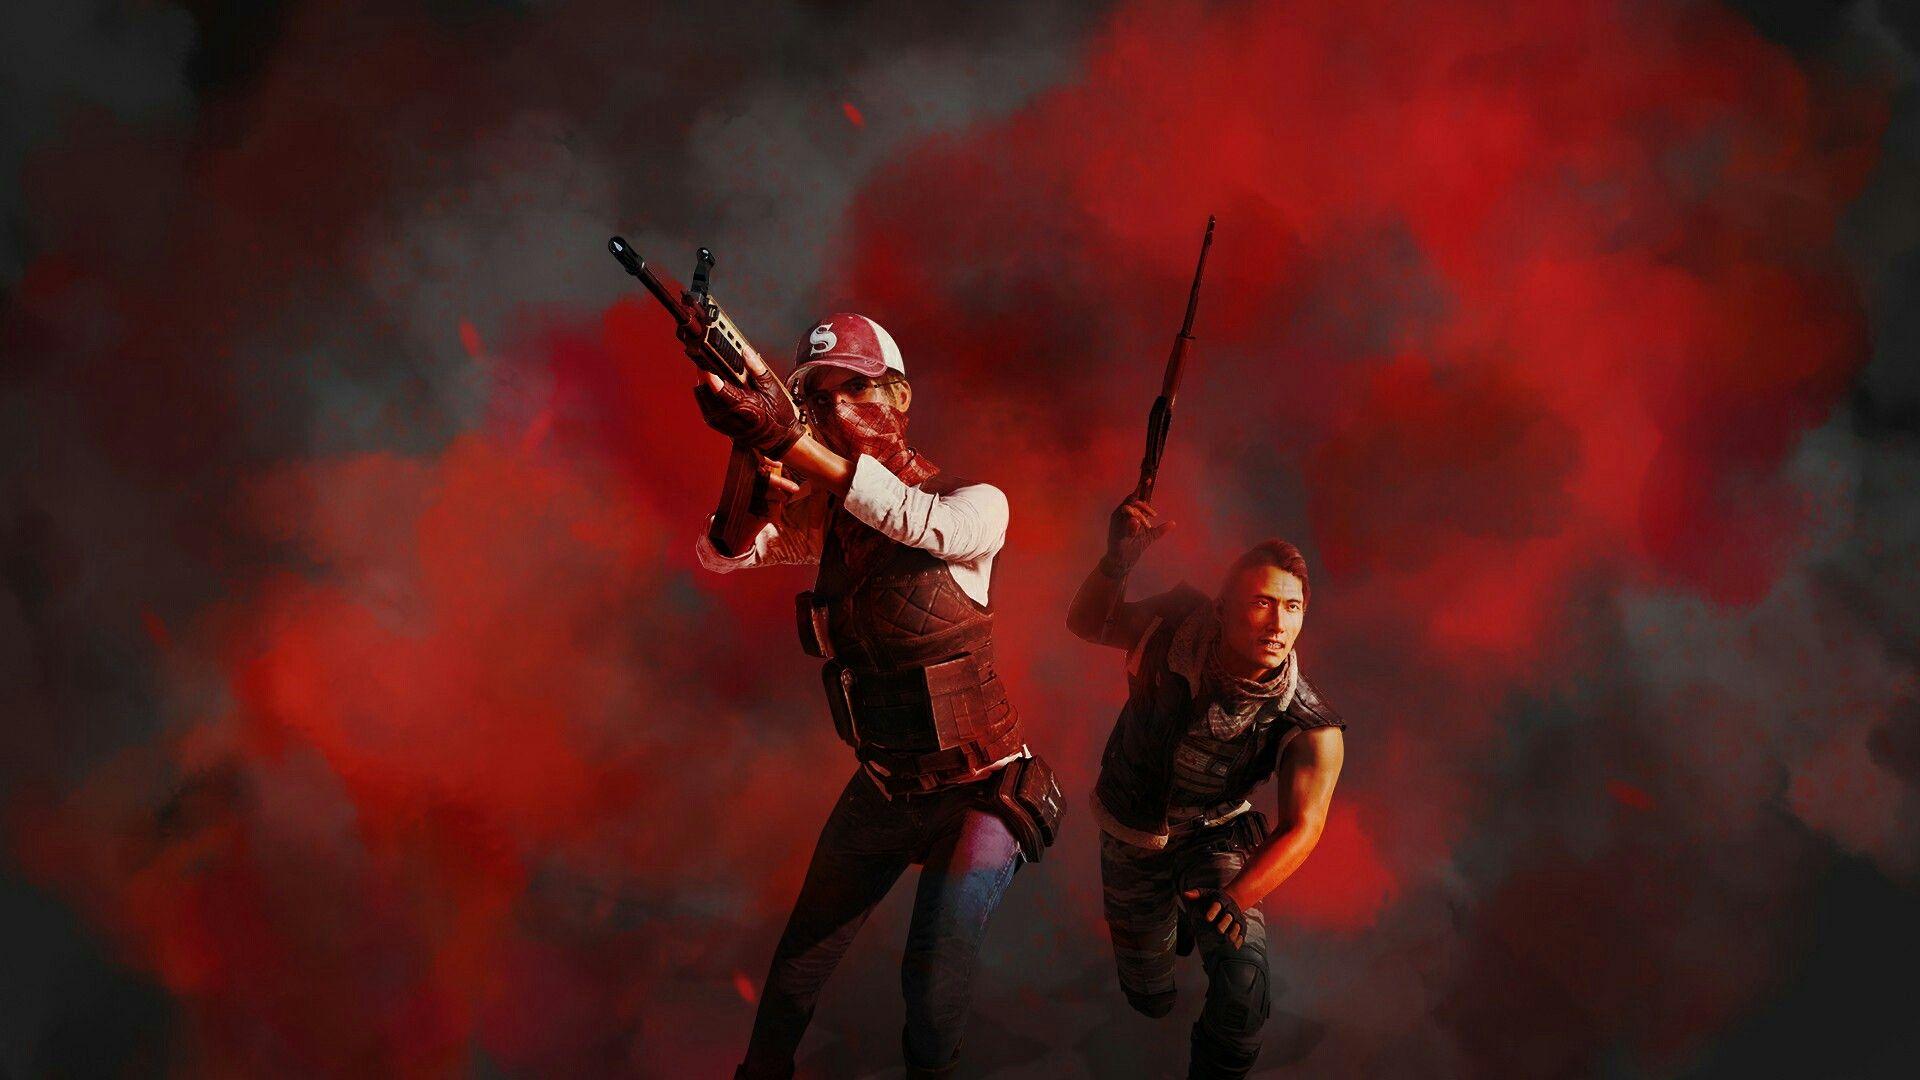 Pubg action wallpapers